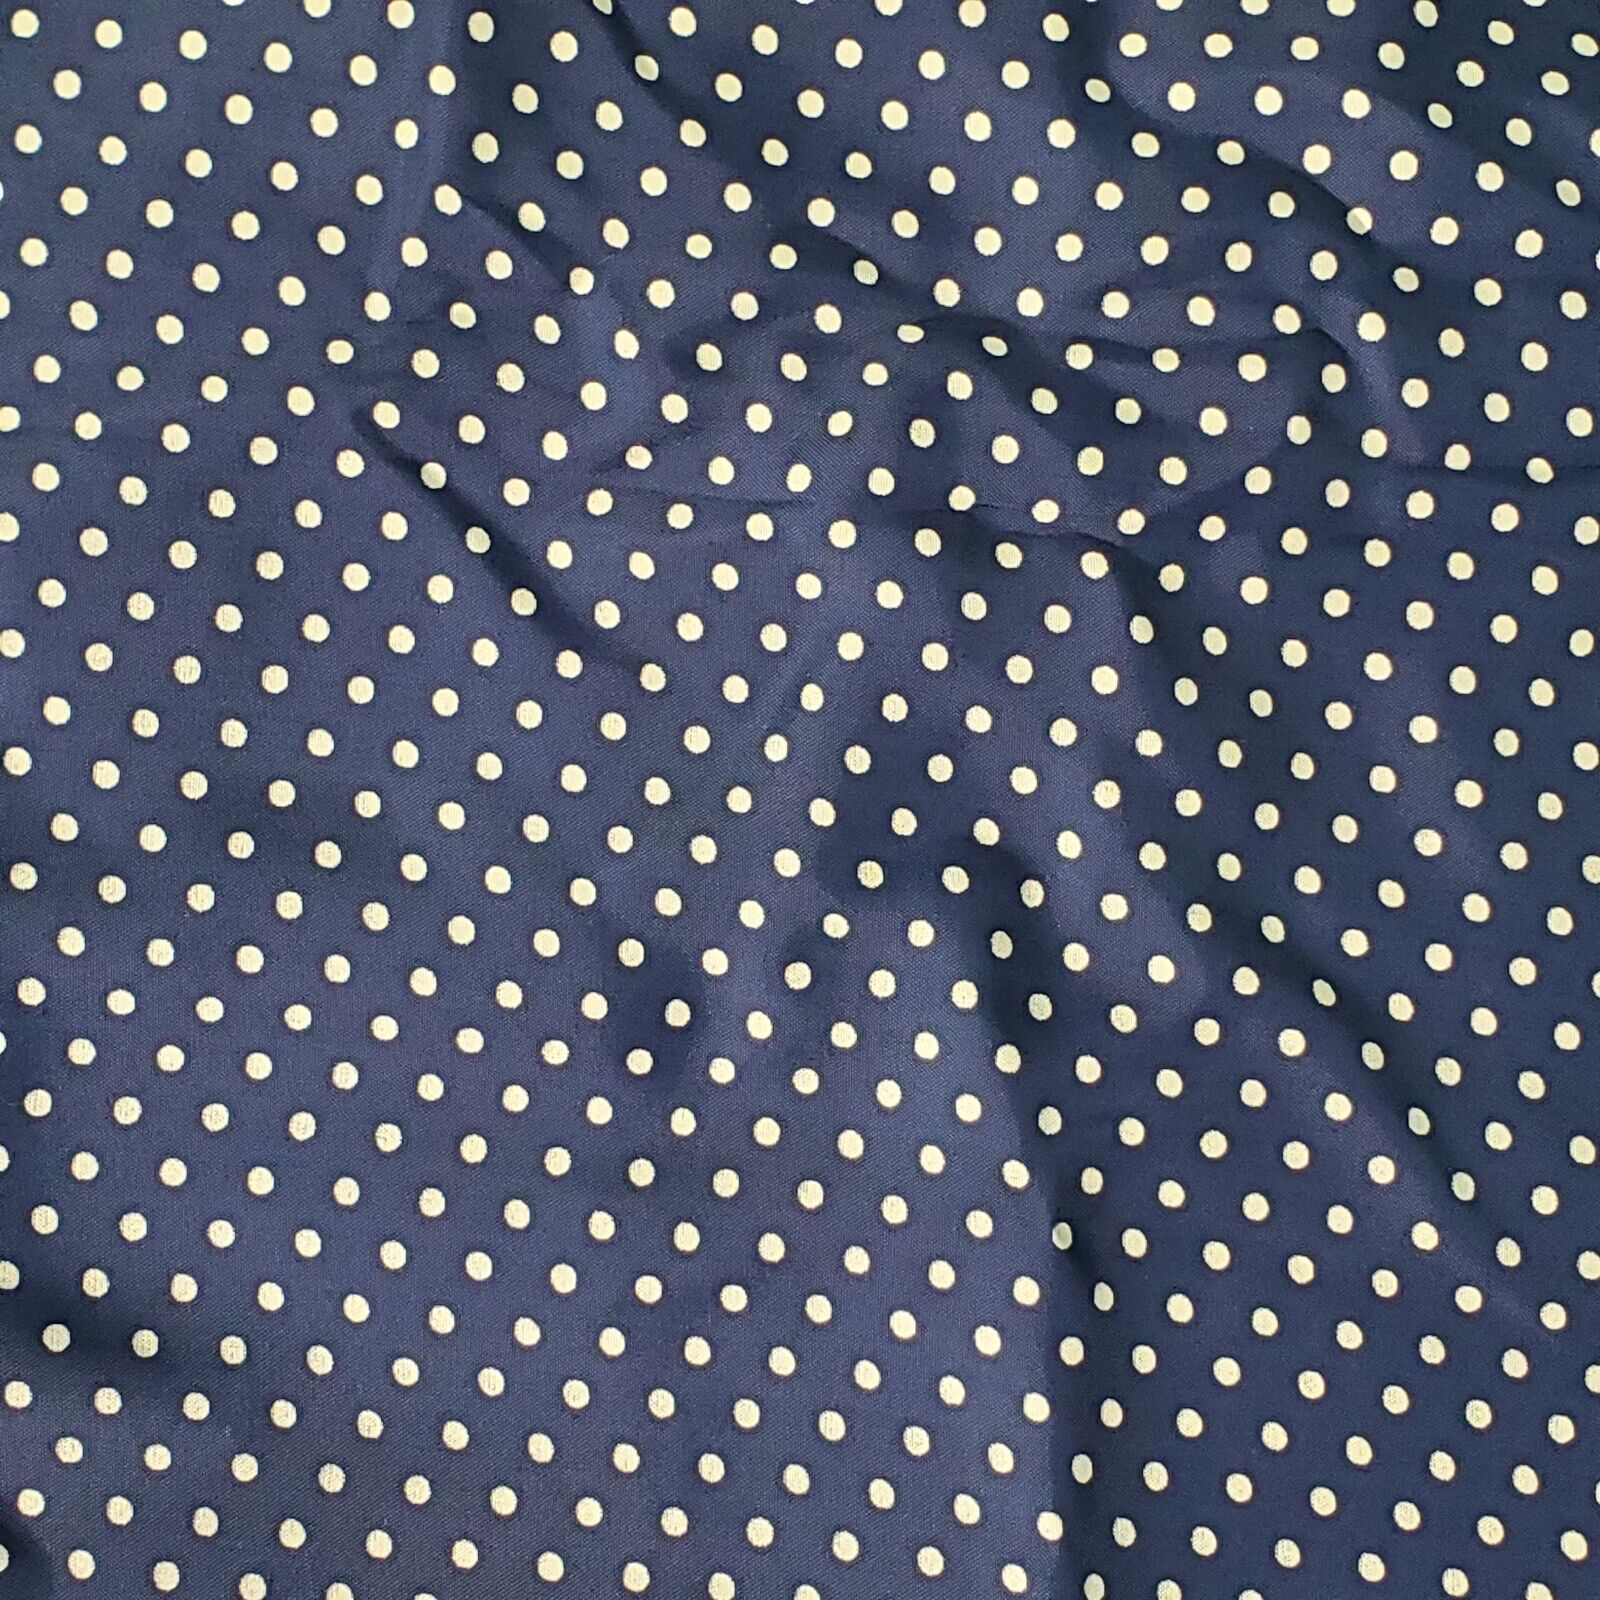 Vintage 1940s 50s Navy & Ivory Polka Dot Quality Weight Rayon Dress Fabric 3 Yds